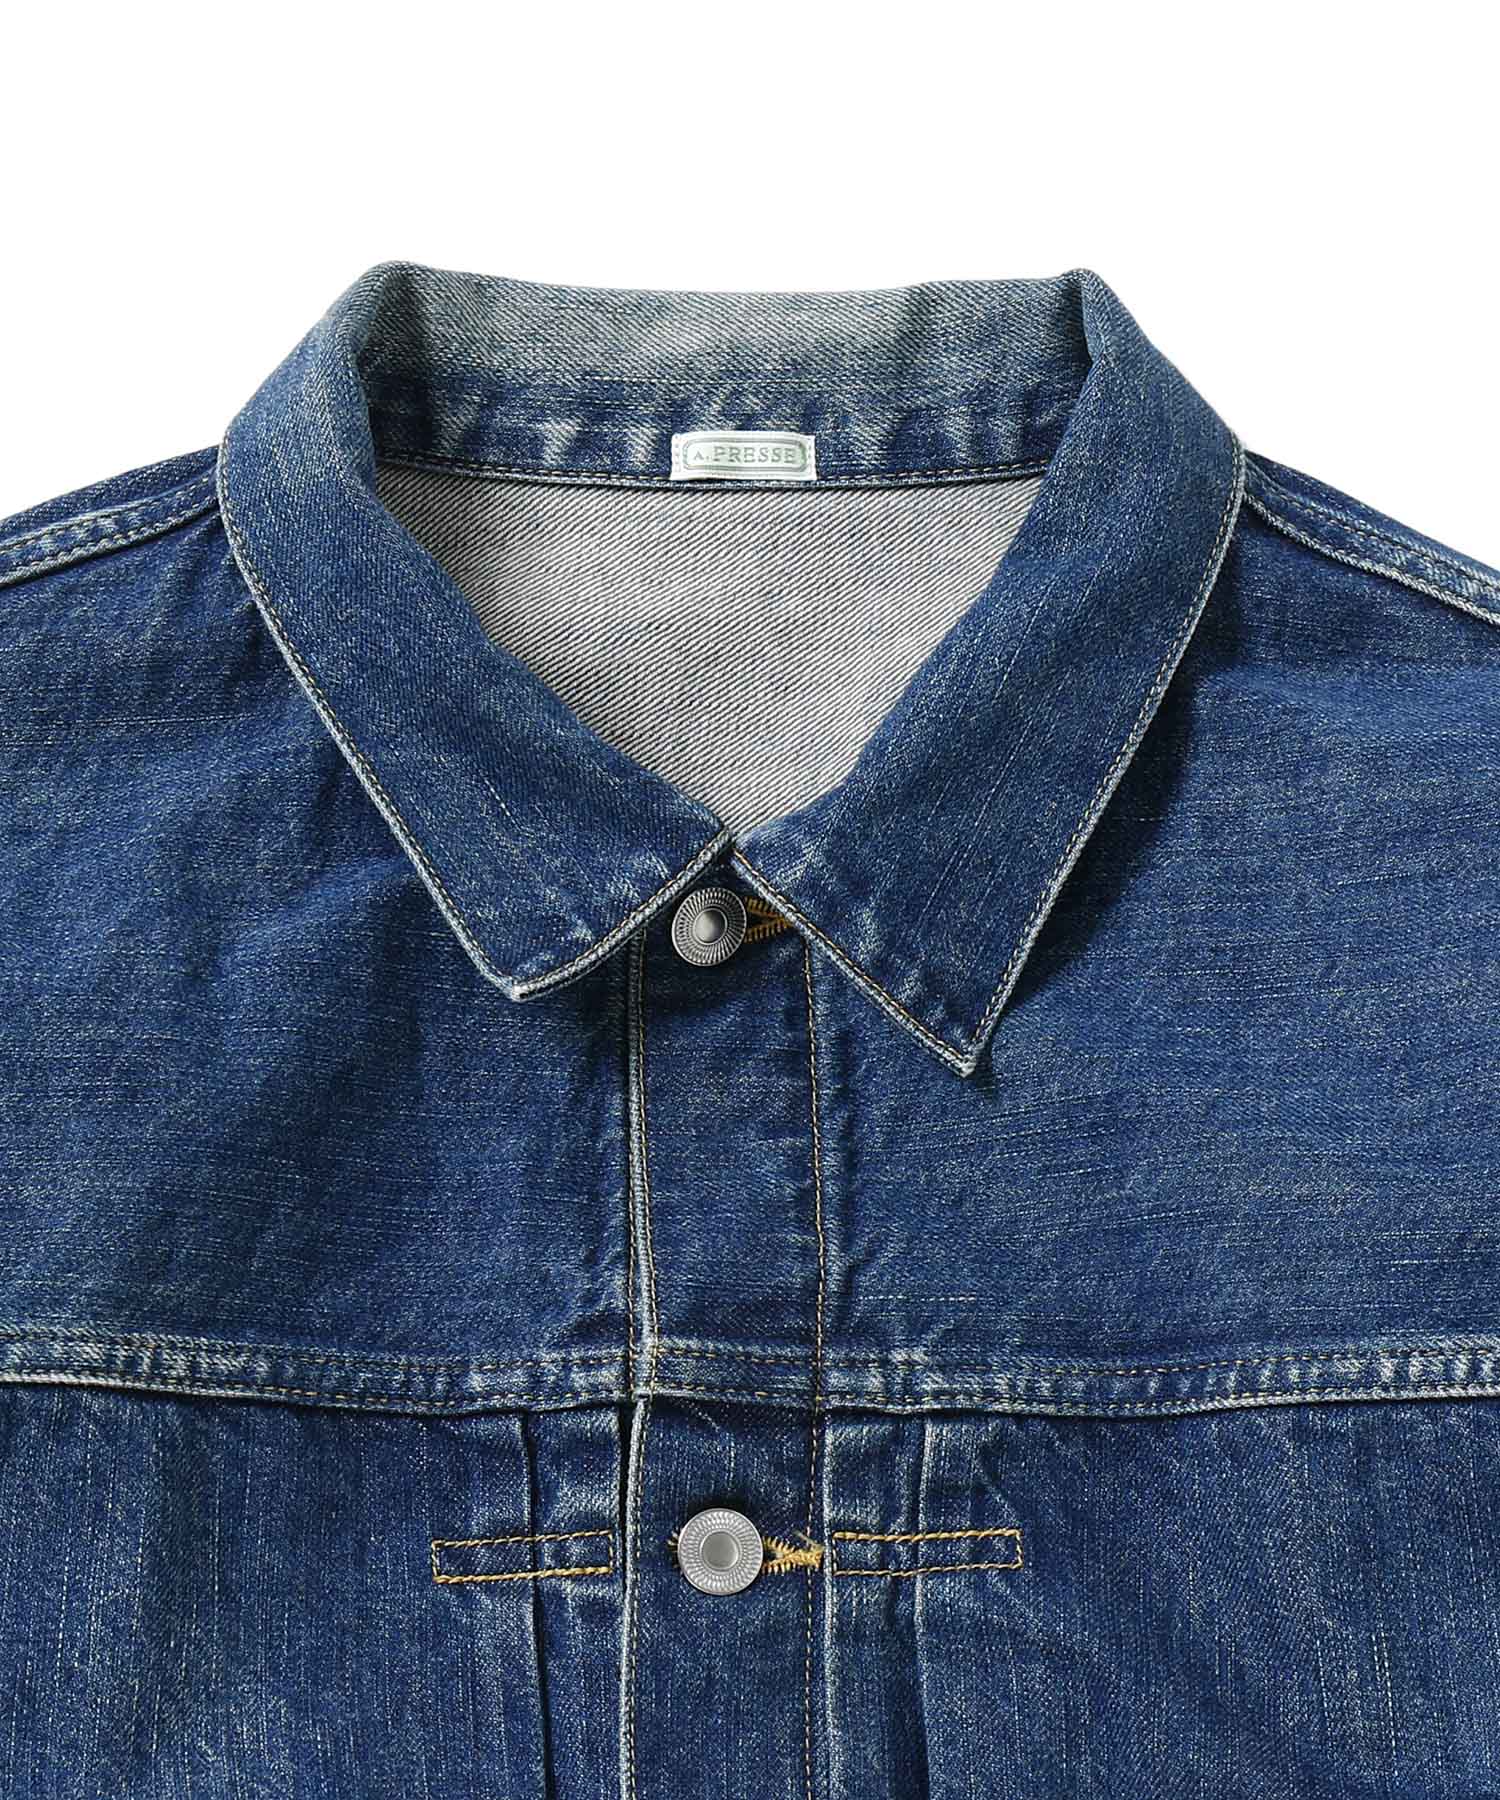 1st Type Denim Jacket - A.PRESSE (アプレッセ) - outer (アウター 